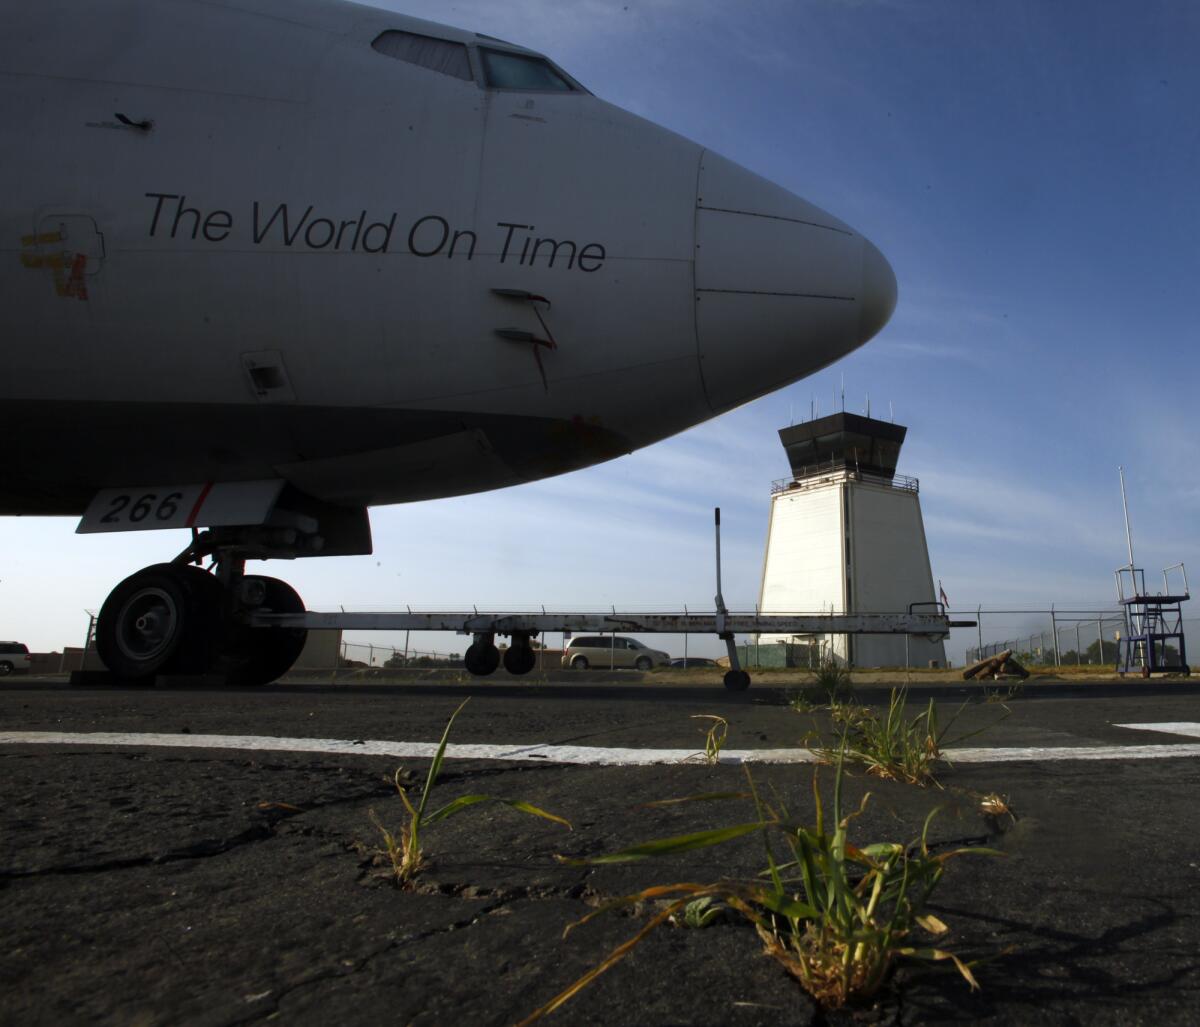 A FedEx plane at Riverside Municipal Airport, which might lose its control tower personnel.